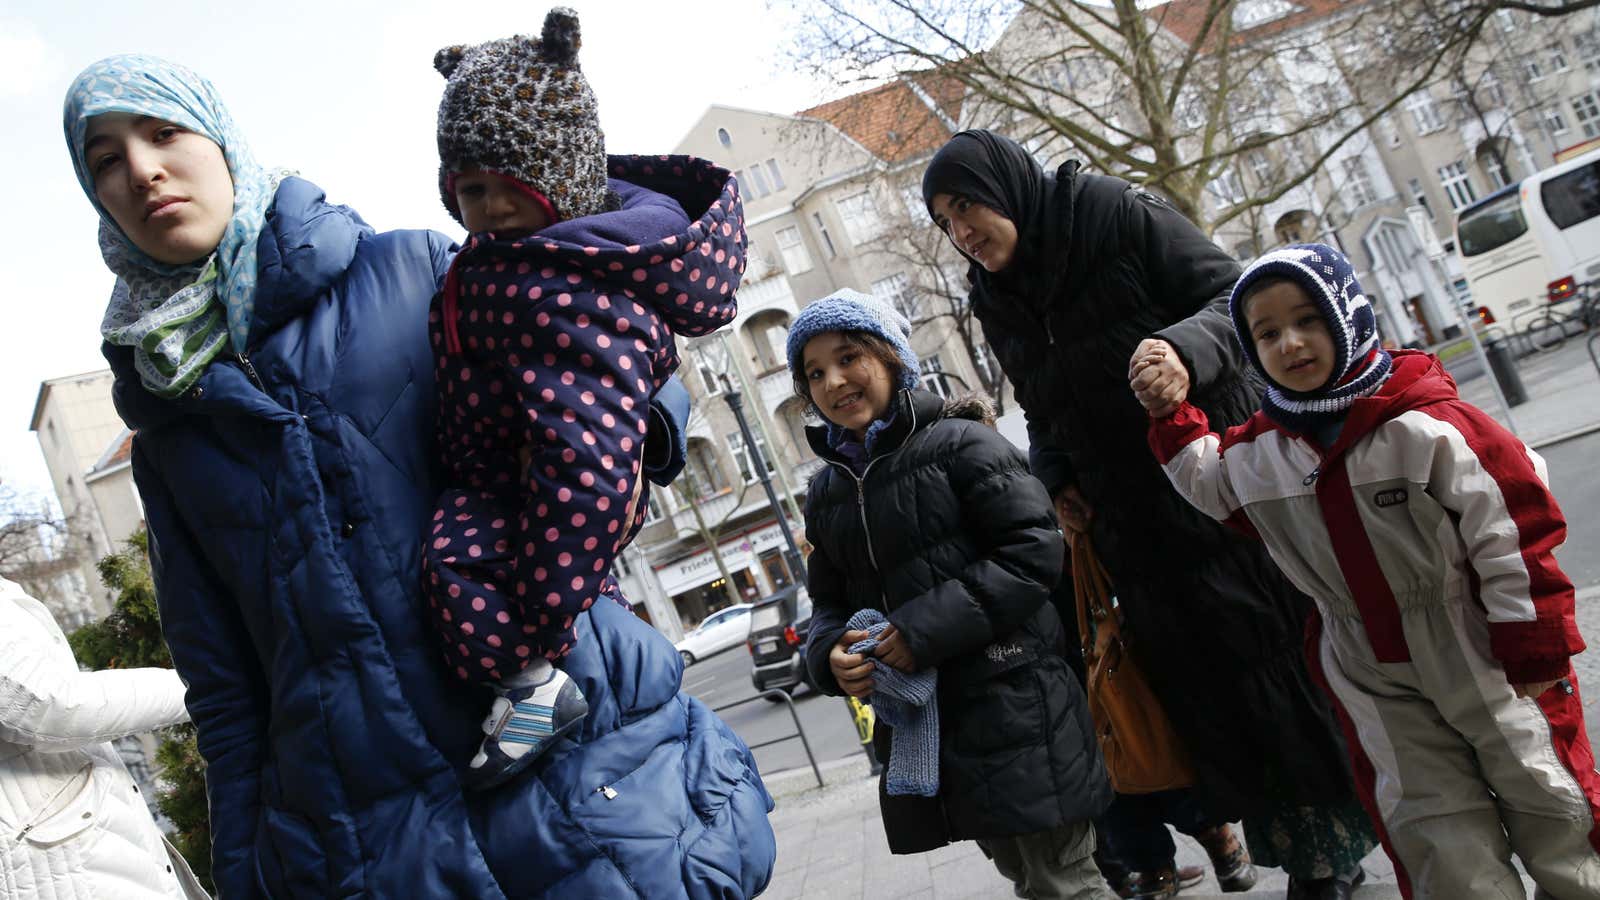 Migrants arrive at a refugee shelter in Friedenau city hall in Berlin.